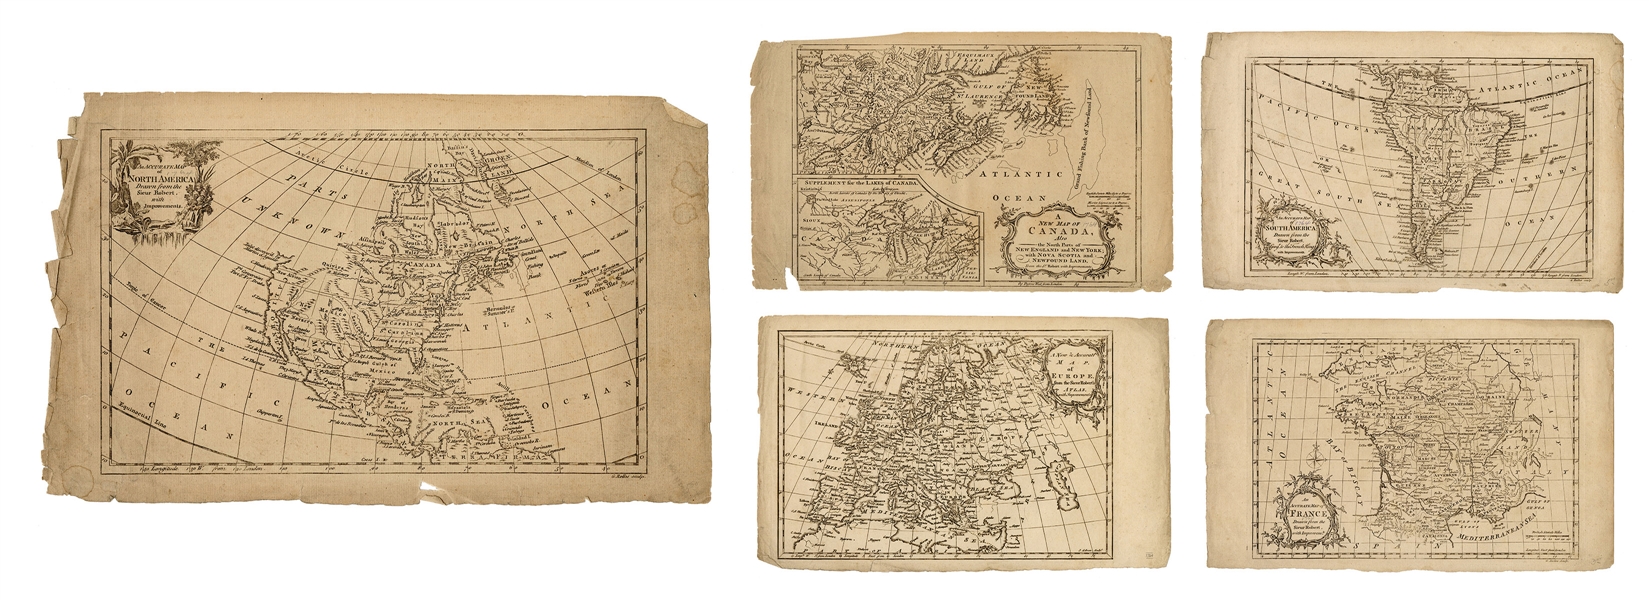 Group of Five Maps Drawn by Vaugondy.